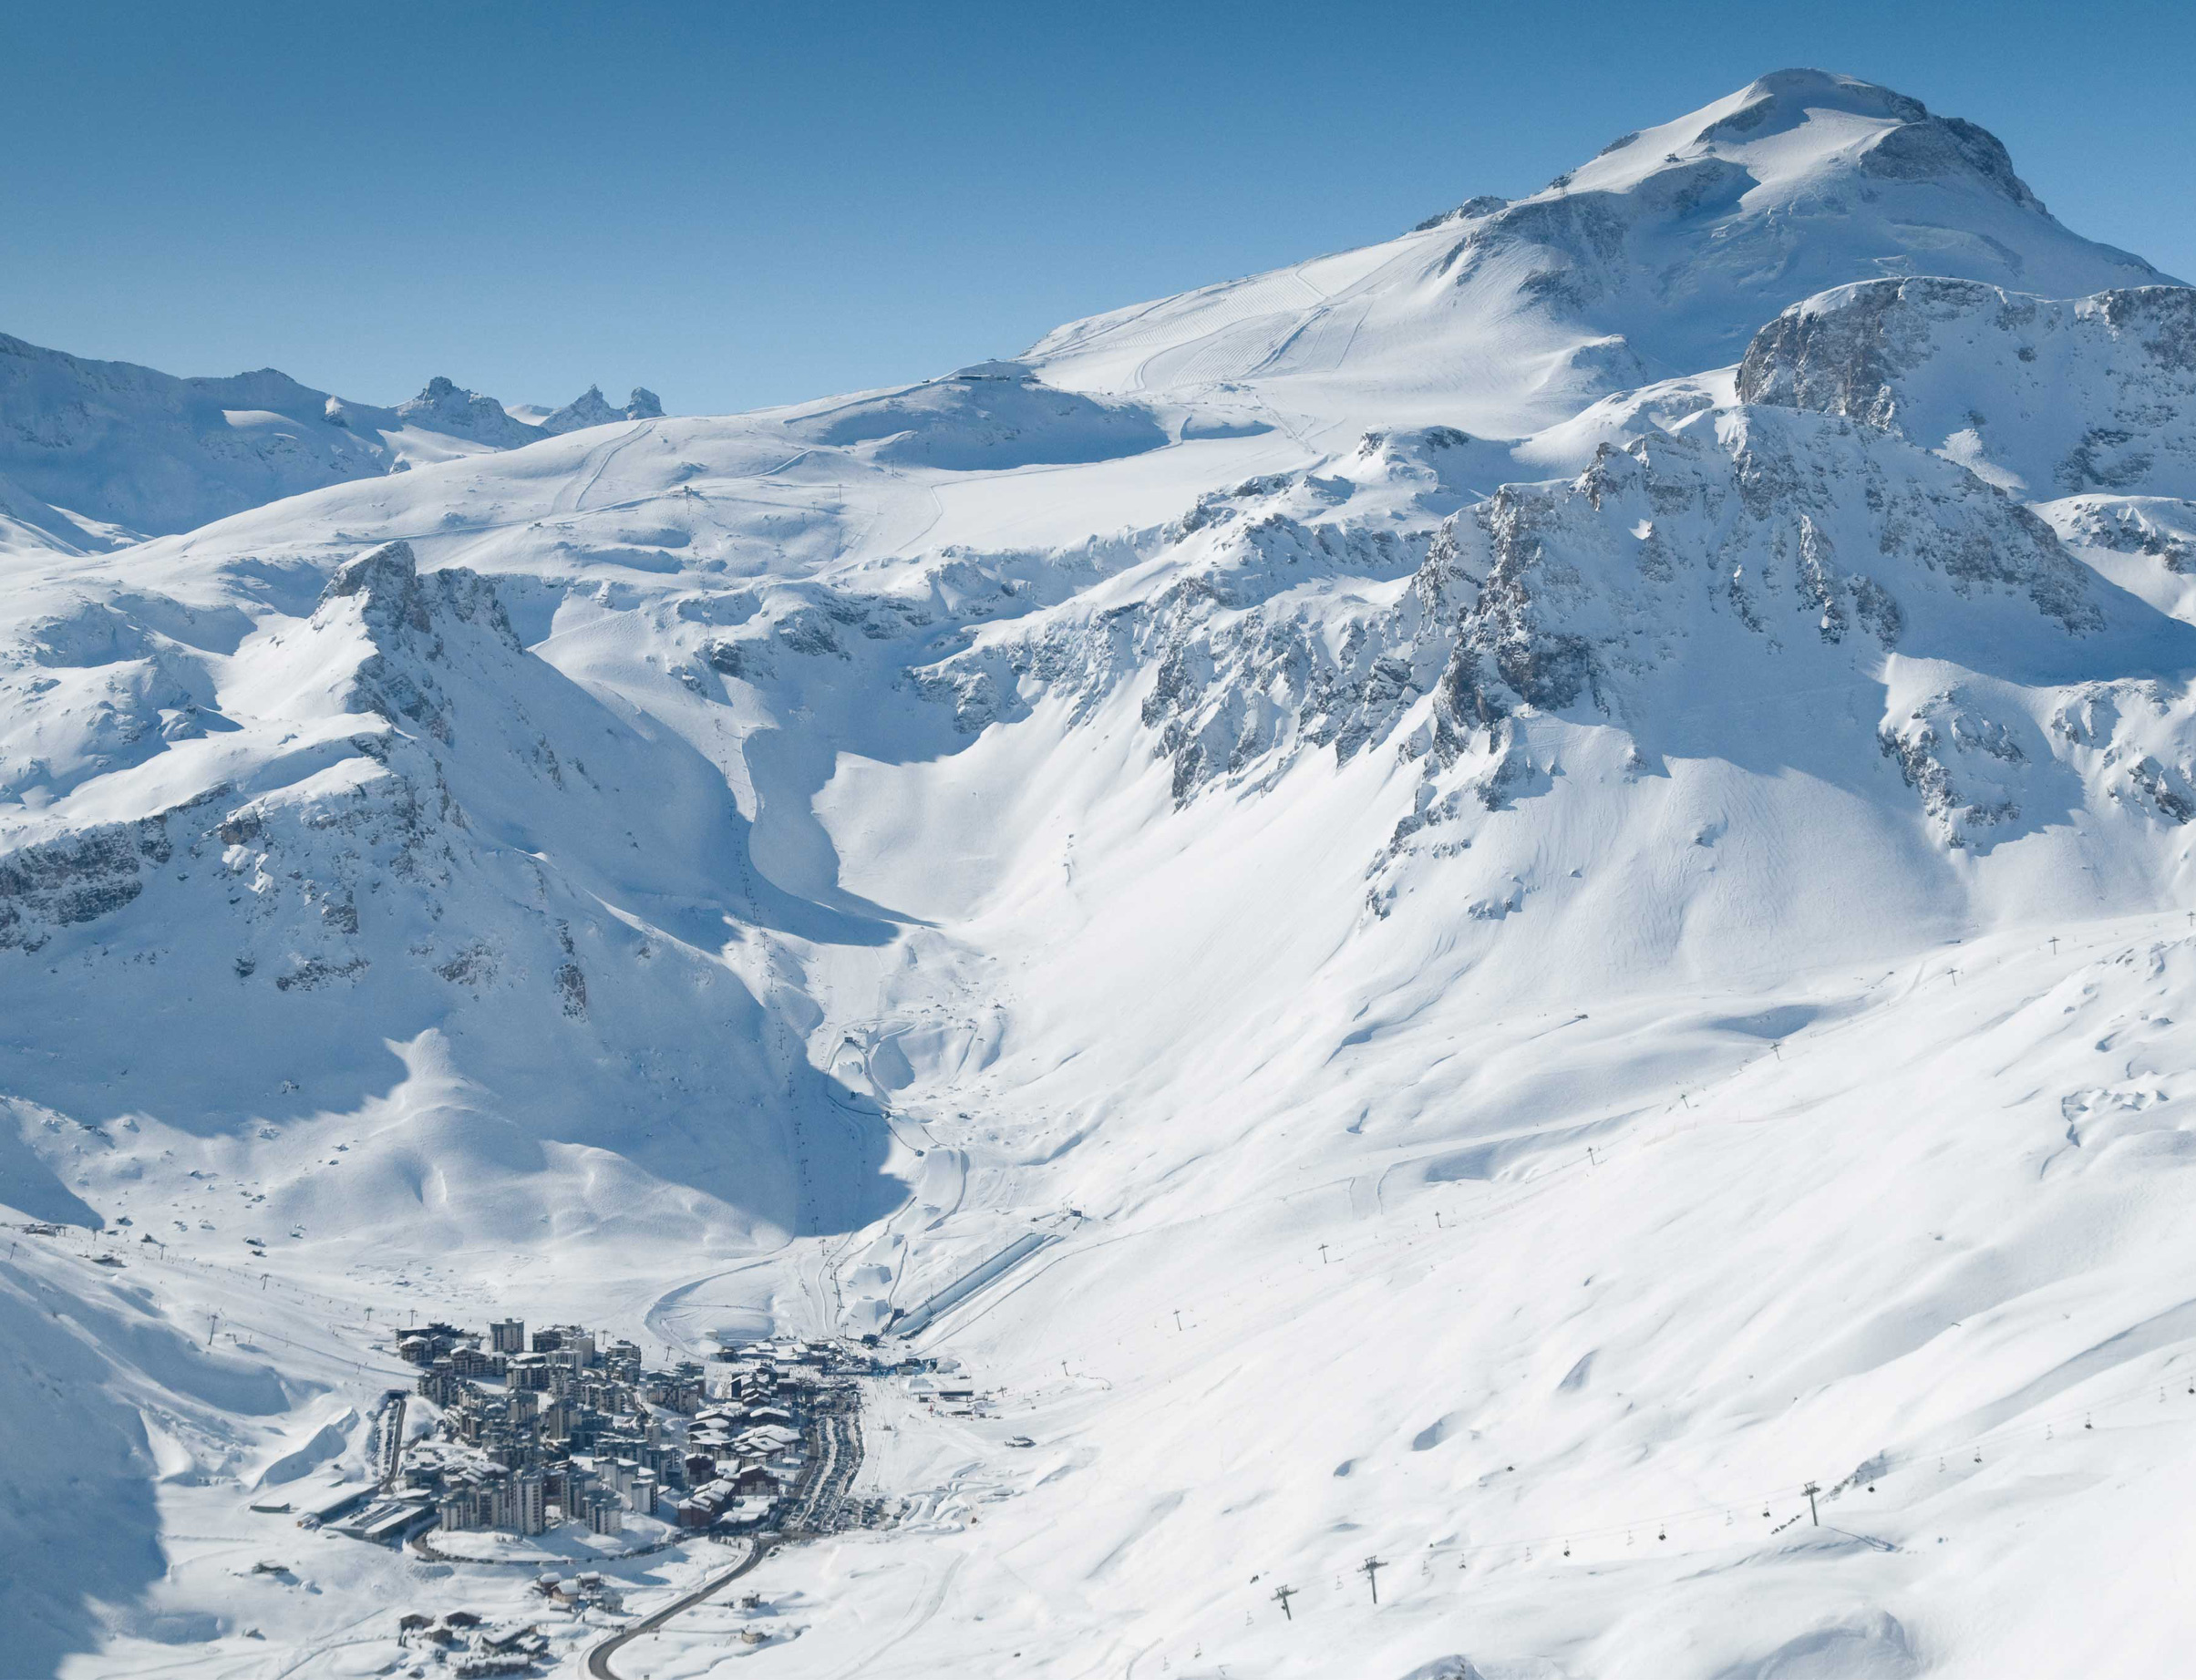 Tignes from above